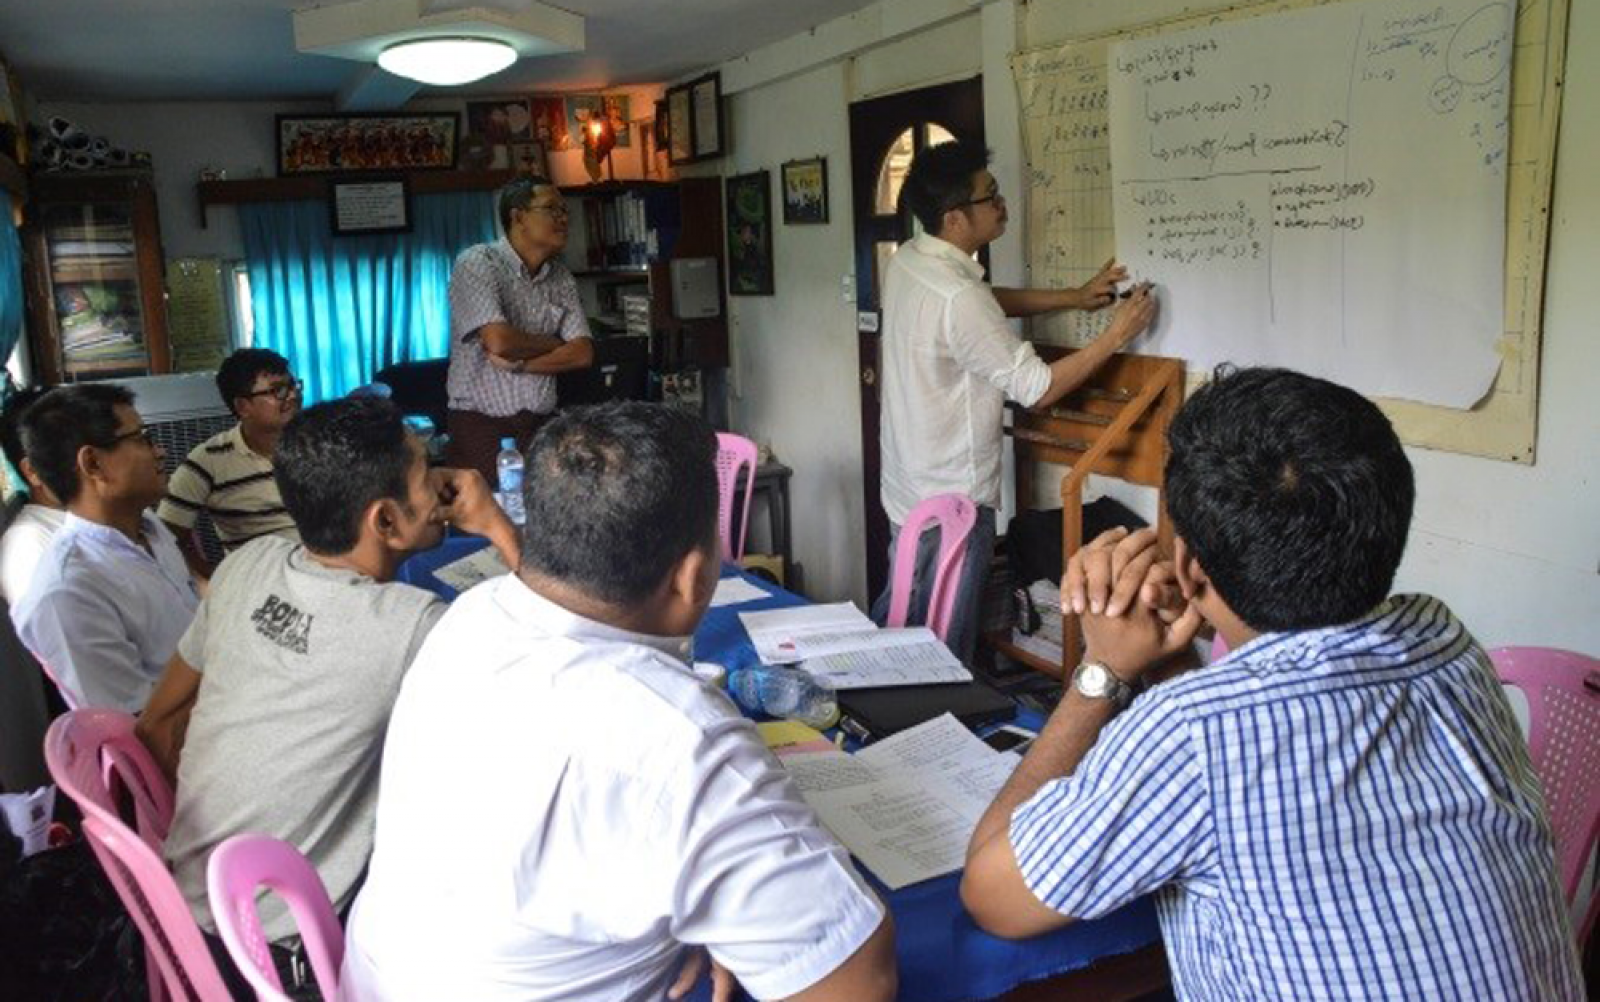 Burma/Myanmar’s Leading Election Observation Group Helps Others Up Their Game